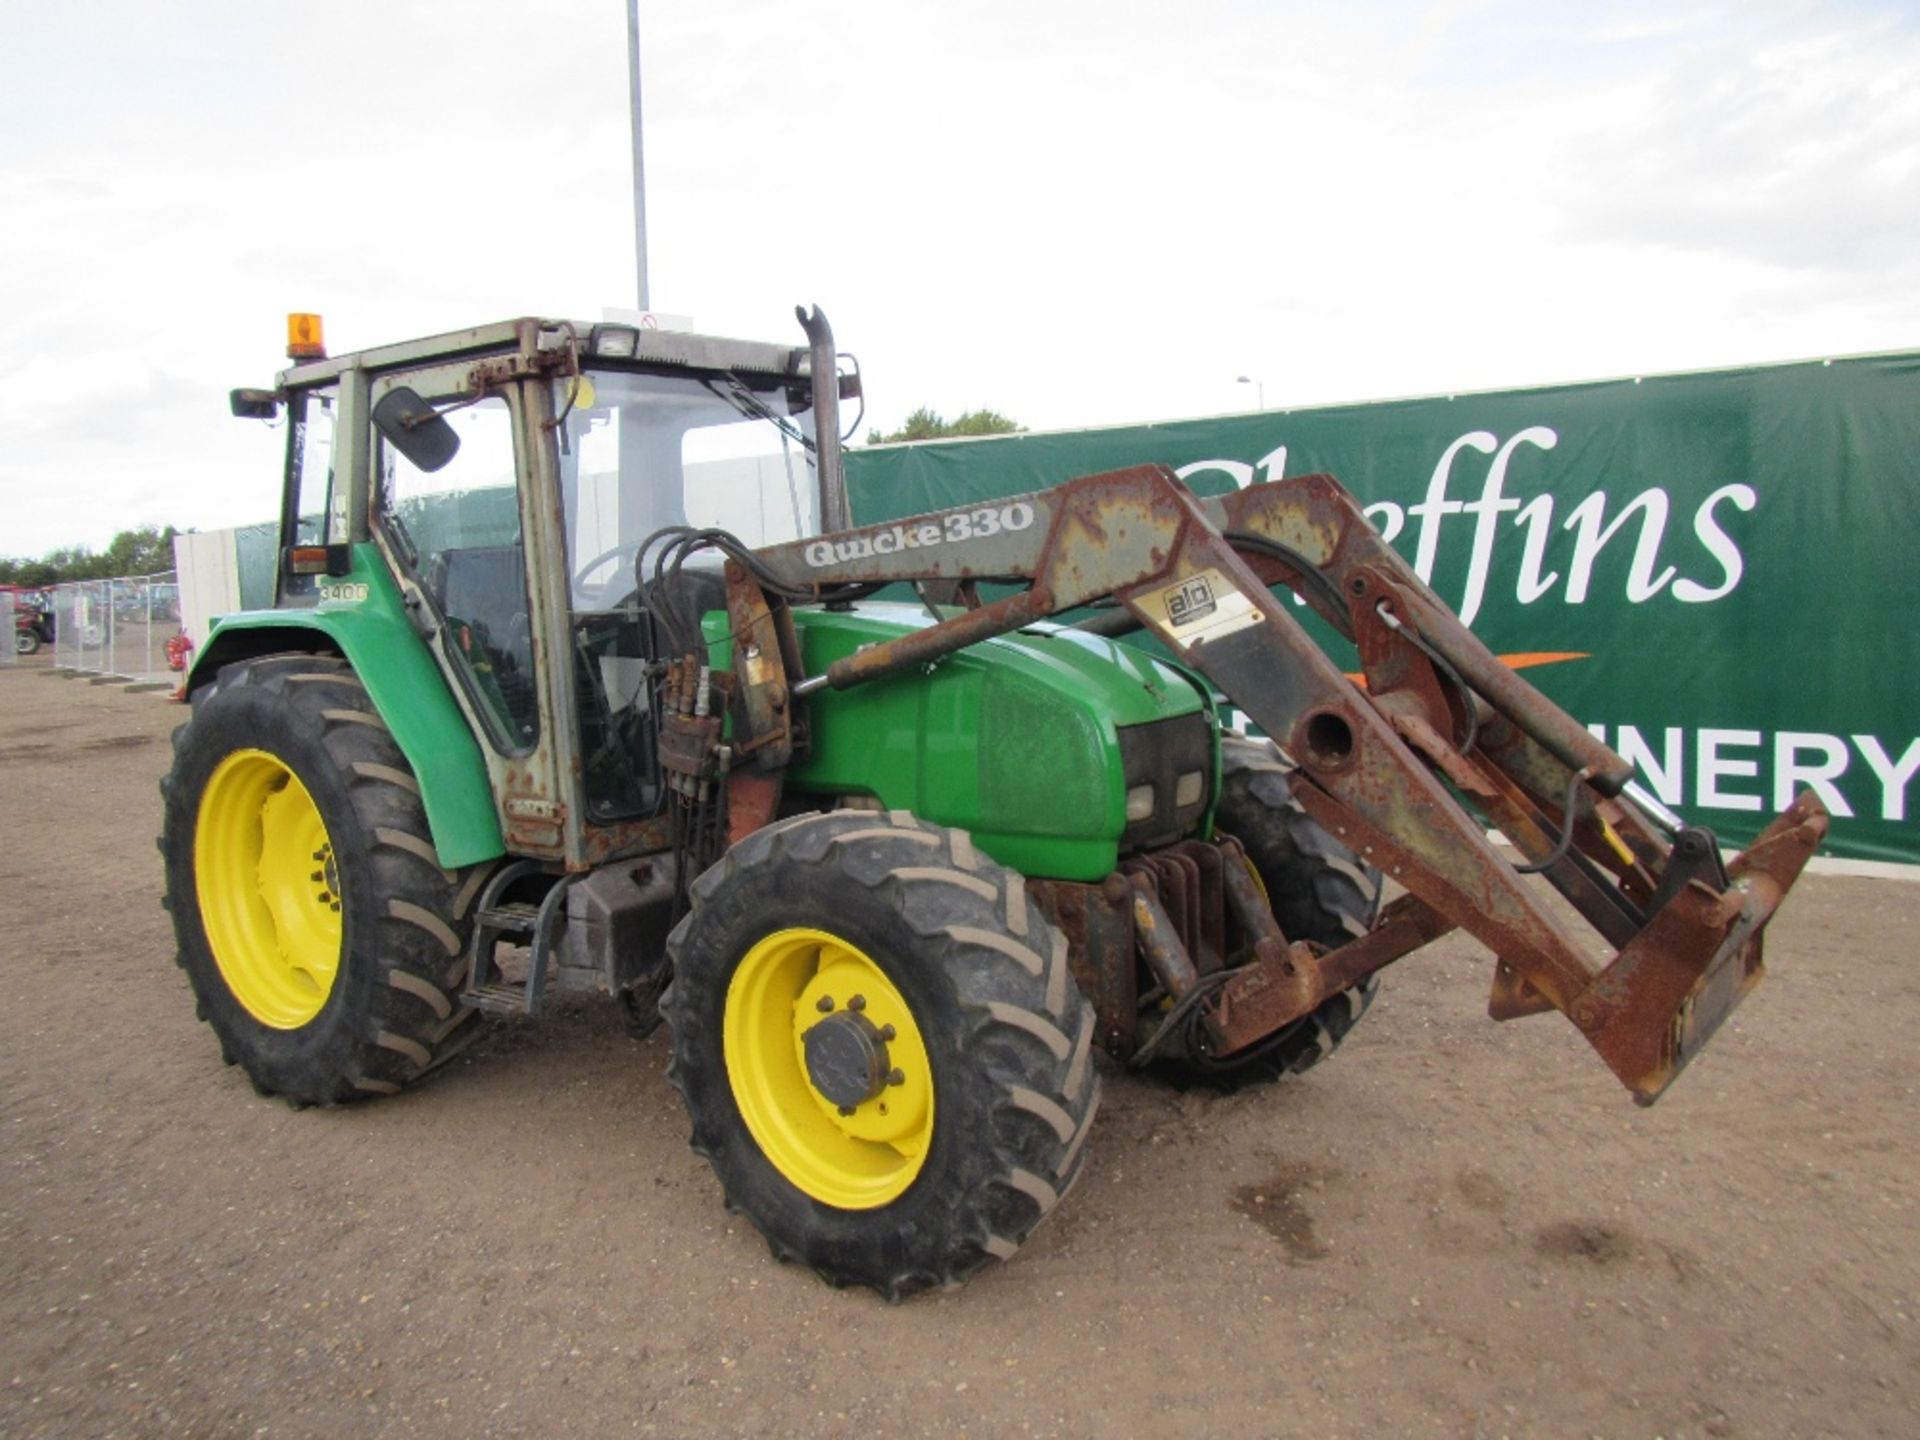 John Deere 3400X Tractor with Quicke 330 Loader. No V5 Reg. No. P364 LPS - Image 3 of 16